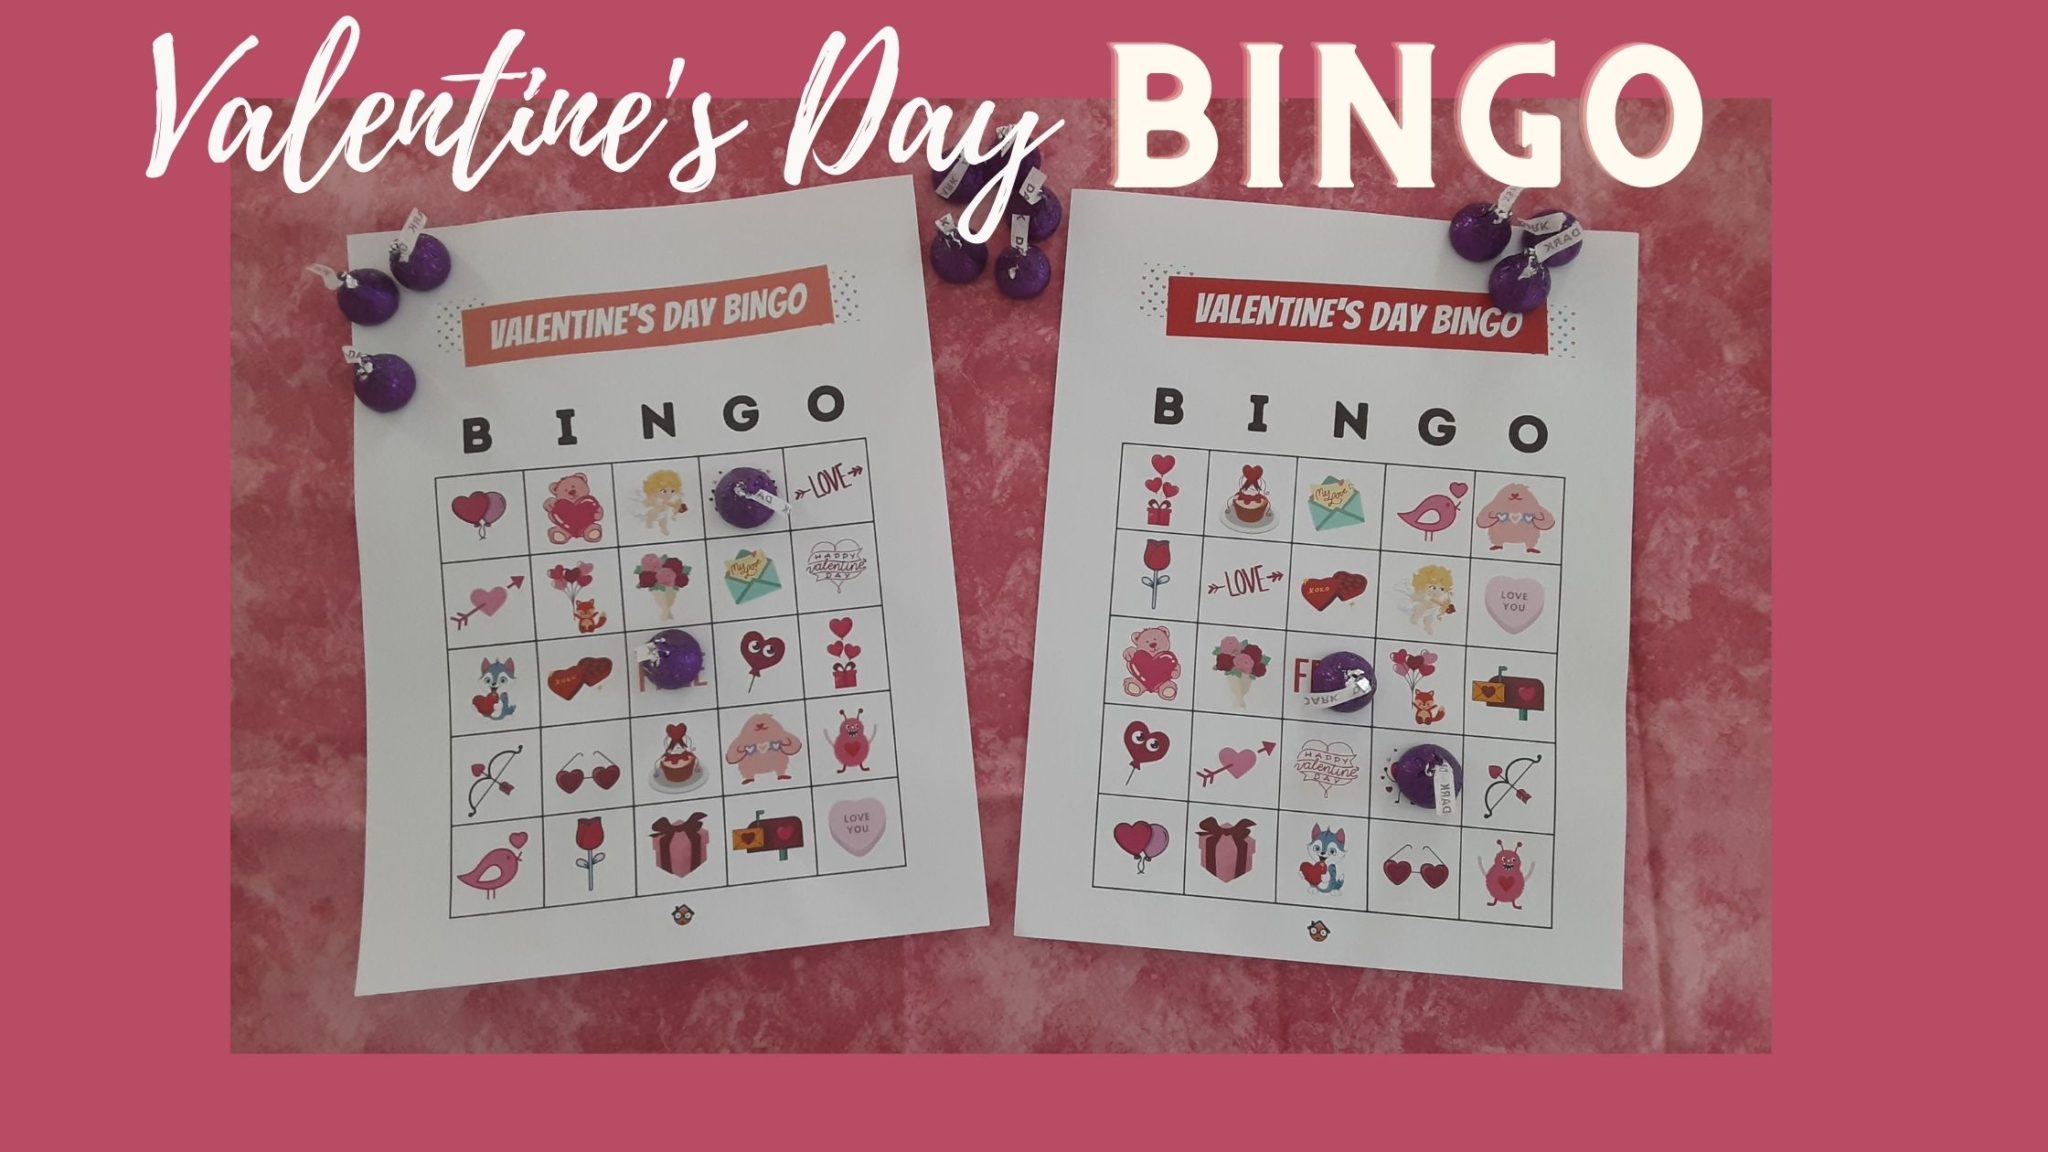 You are currently viewing Super-Cute Valentine’s Day BINGO for the Family